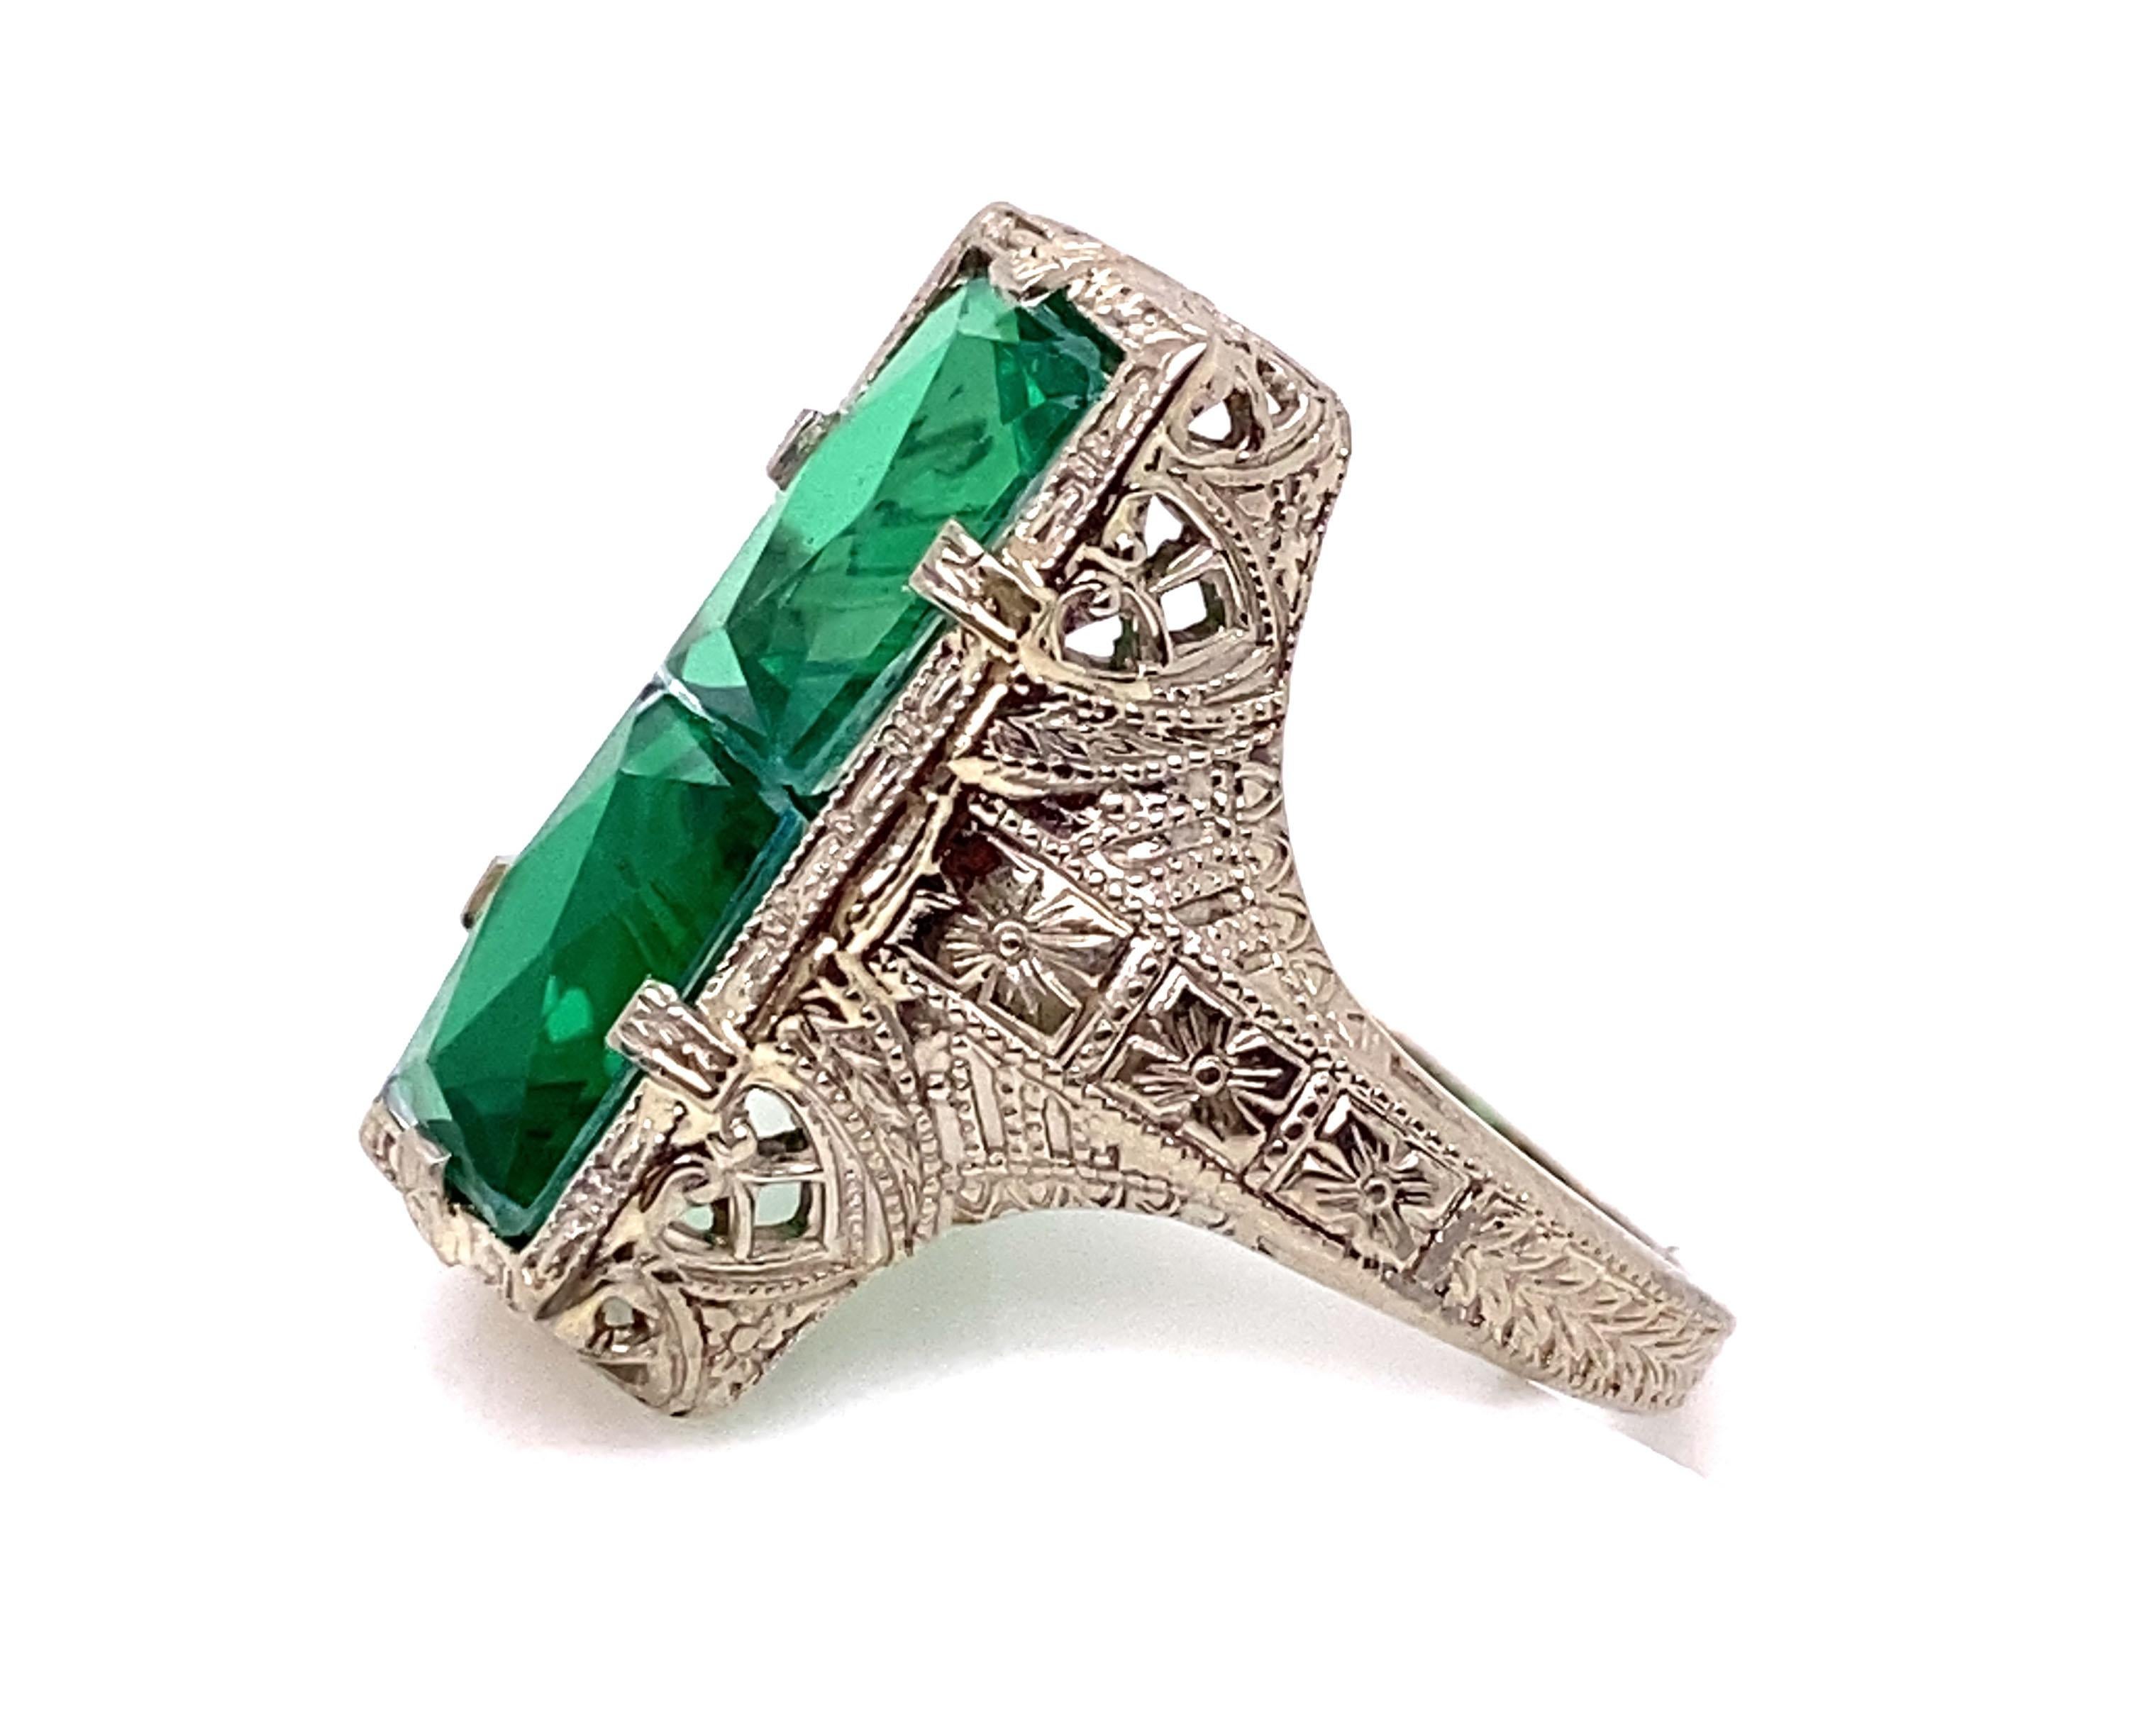 French Cut Vintage Emerald Cocktail Ring 3ct Antique 14K Art Deco Flowers Filigree